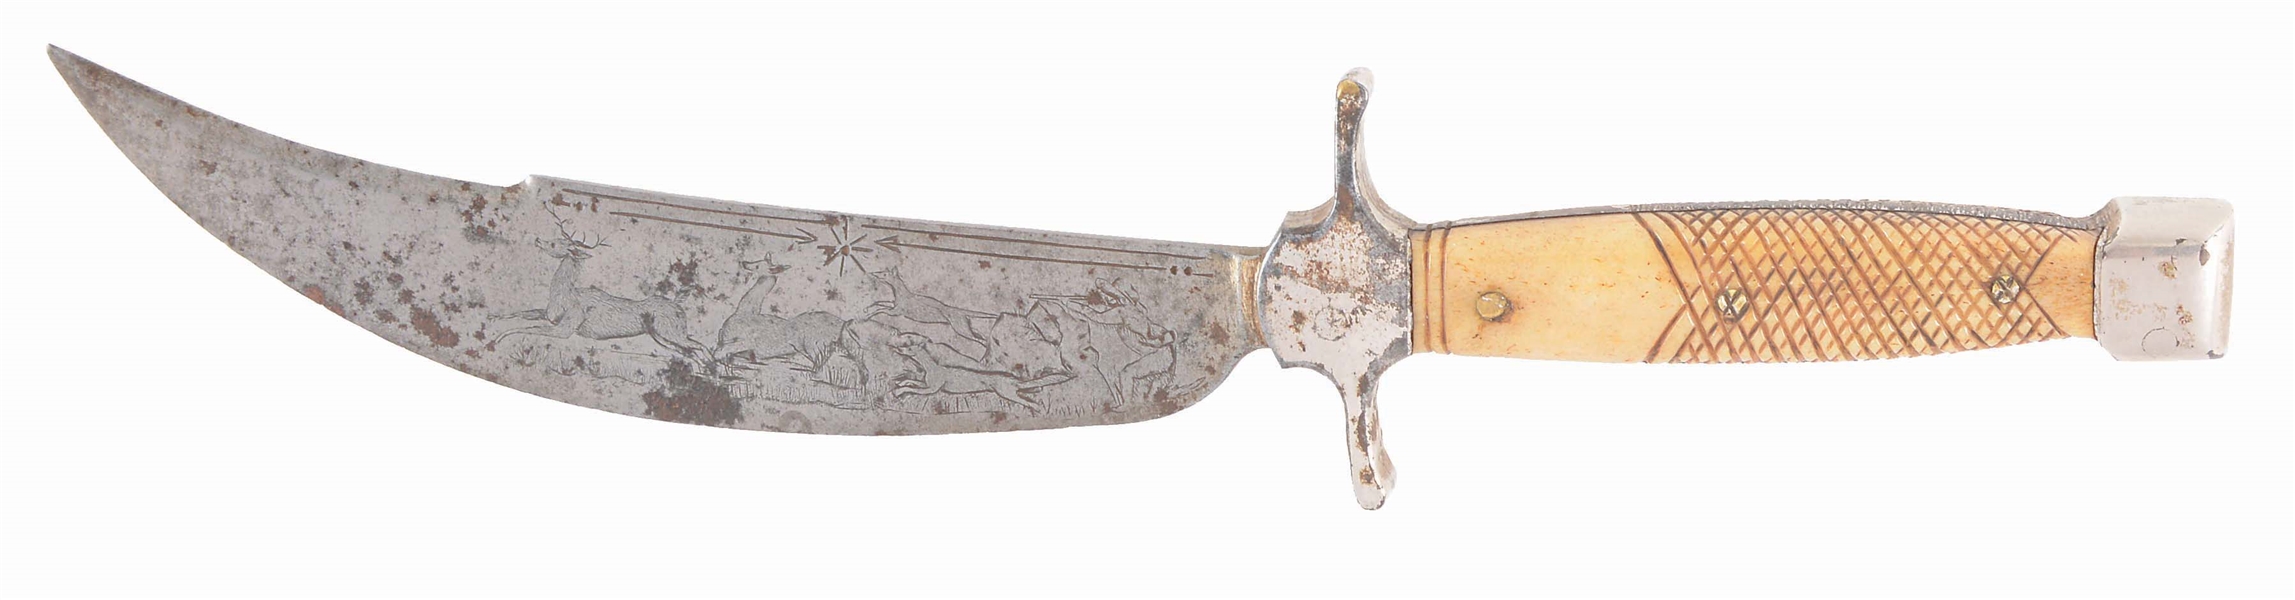 UNUSUAL BOWIE KNIFE WITH ENGRAVED HUNTING SCENE.